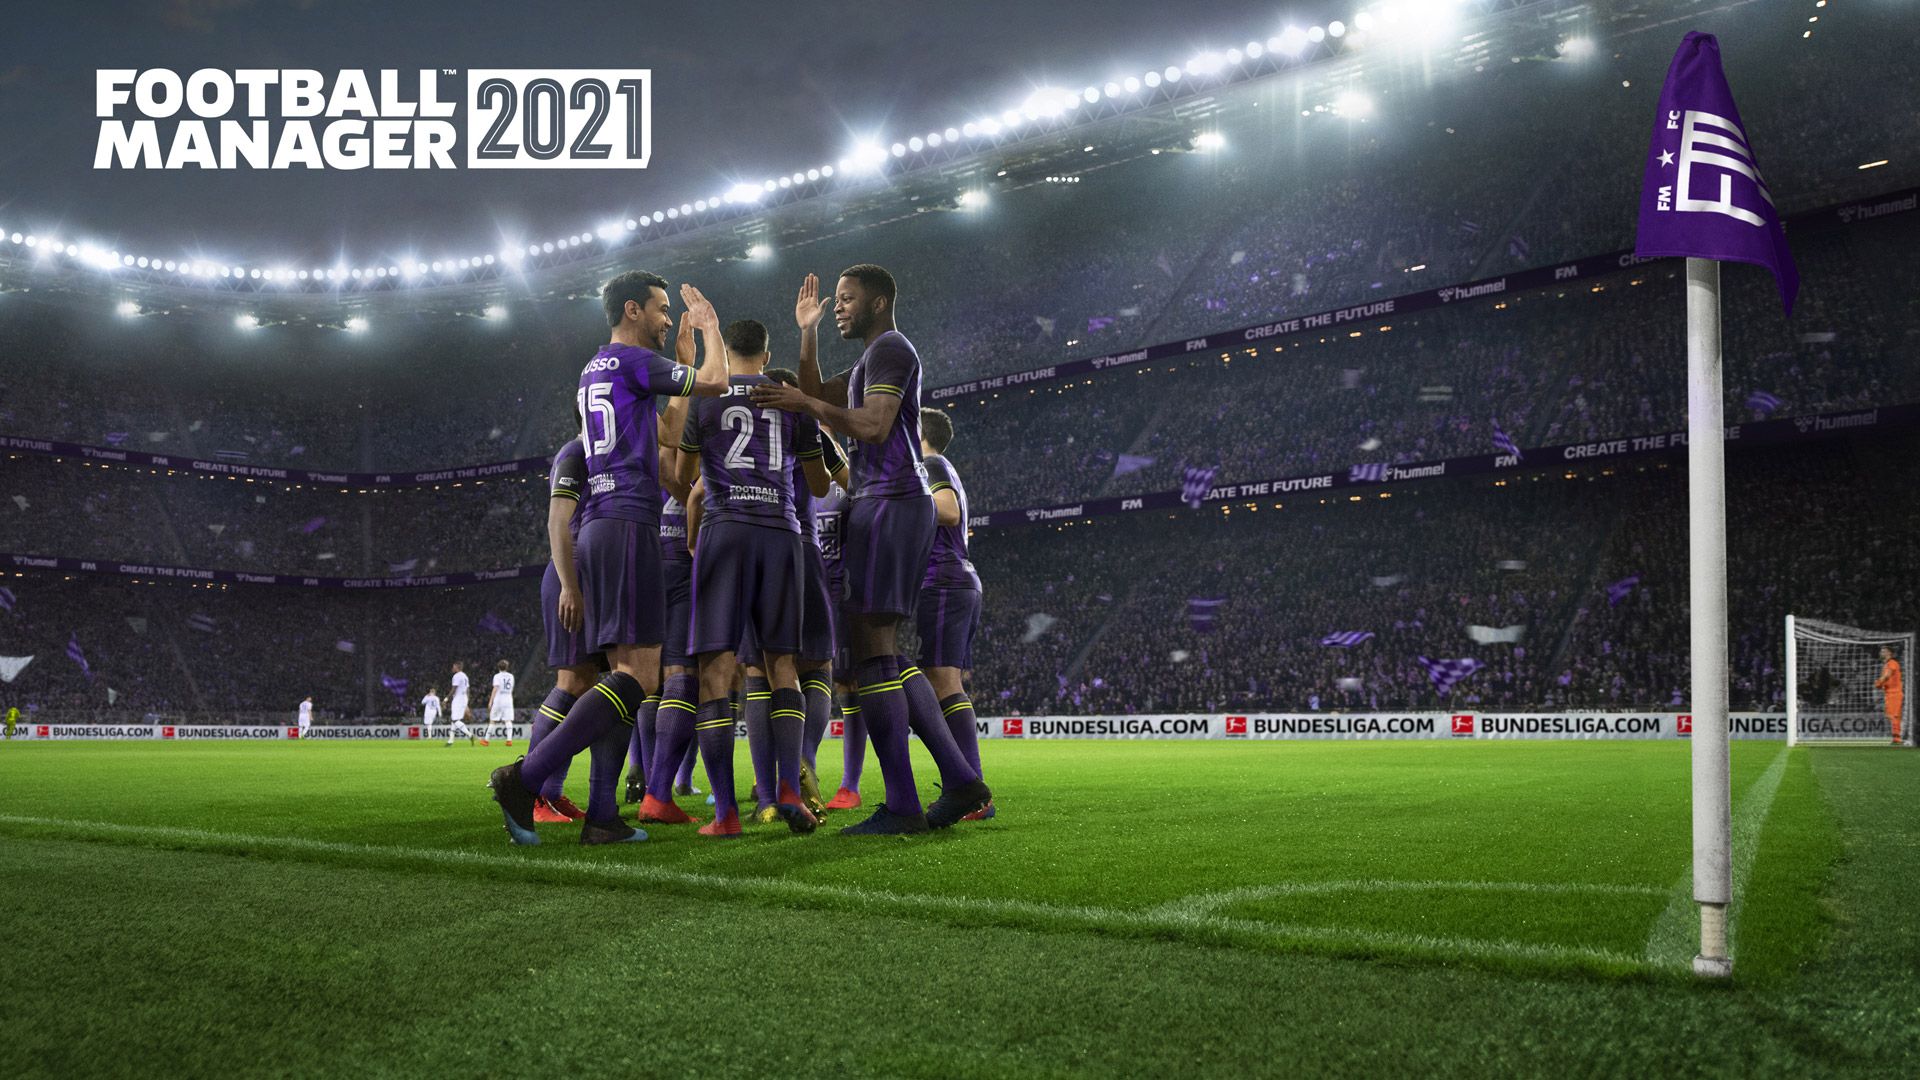 Free Football Manager 2021 Wallpaper in 1920x1080